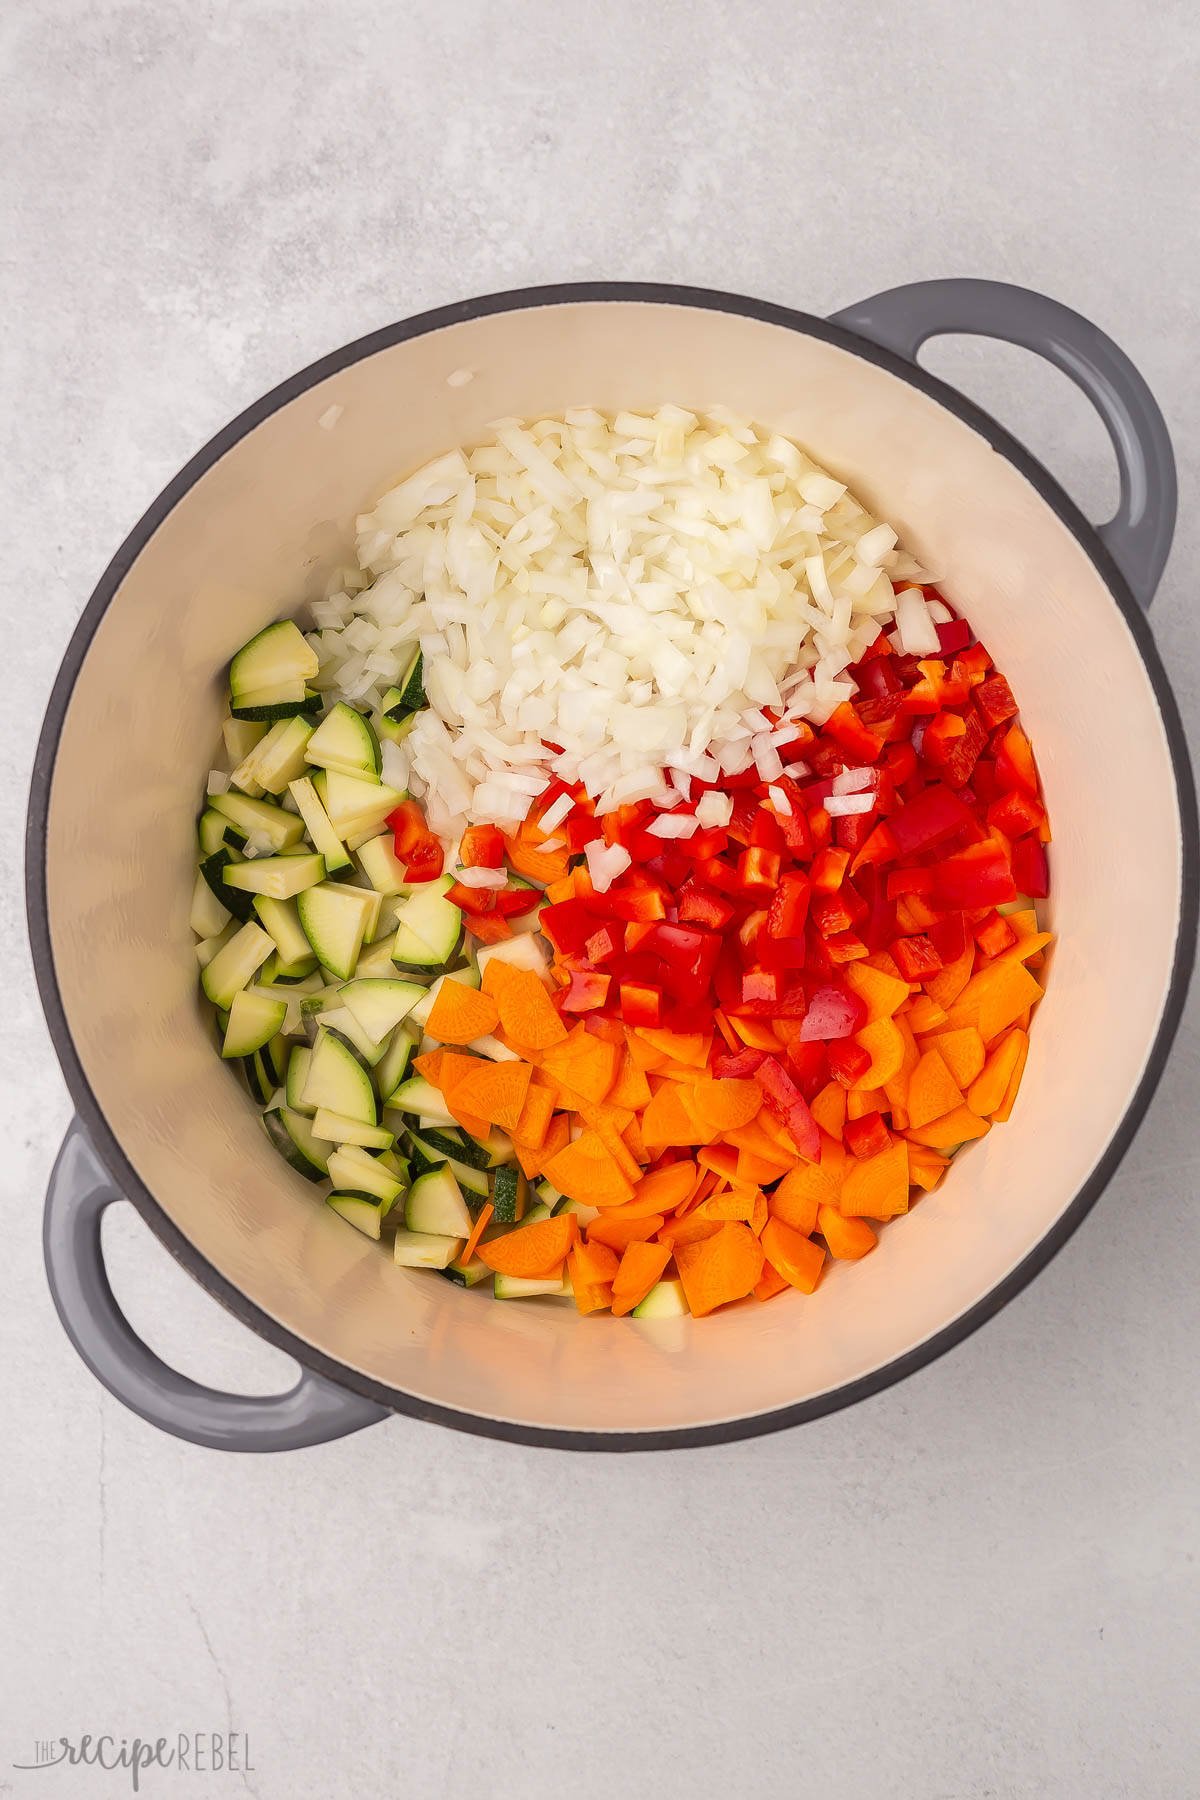 Top view of cooking pot with chopped vegetables in it.